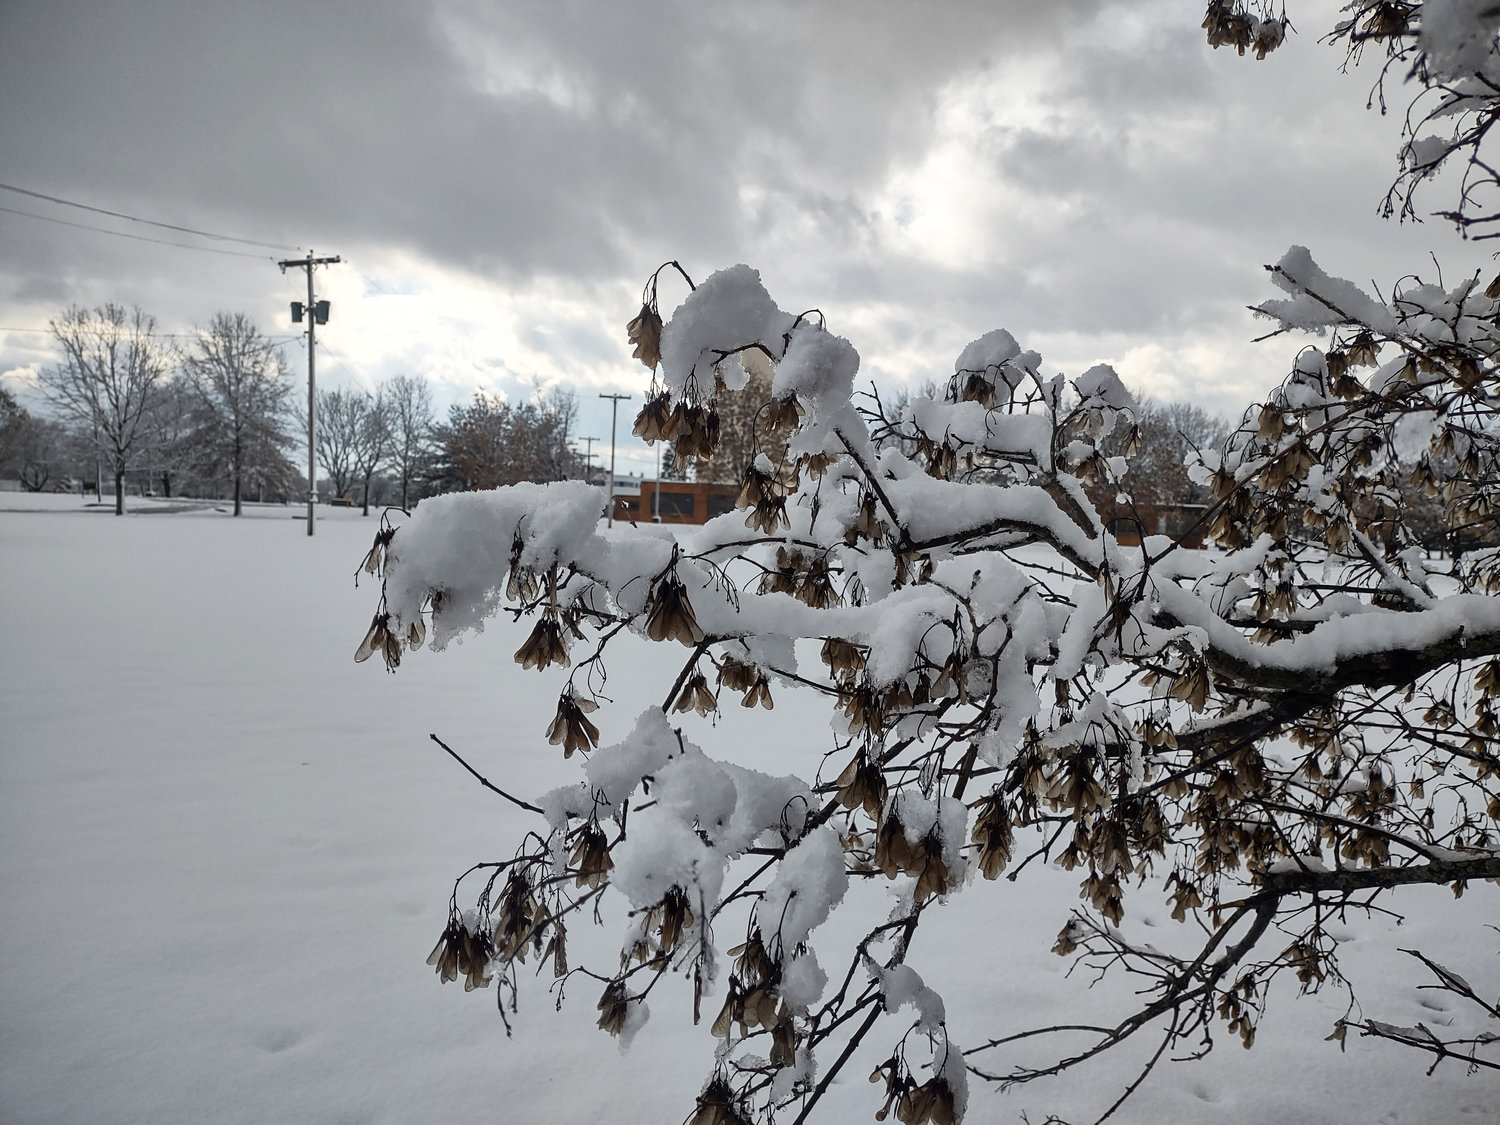 Snow covered branches Thursday morning in Rome as Oneida County residents woke up to the first measurable snow of the season. Late Thursday morning, the National Weather Service announced that more snow is on the way.